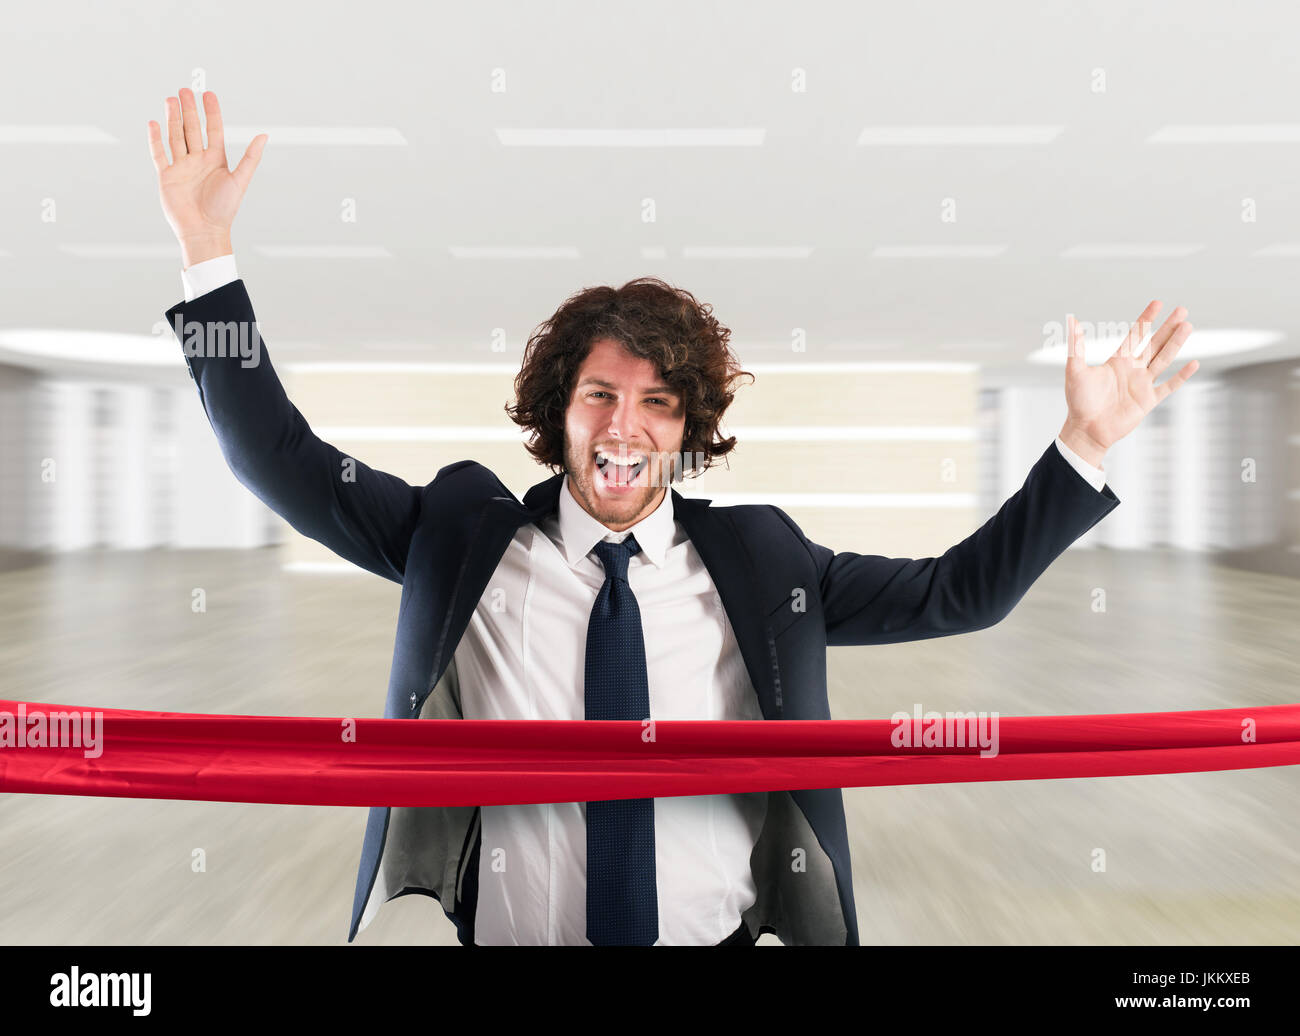 Successful businessman on the finishing line Stock Photo